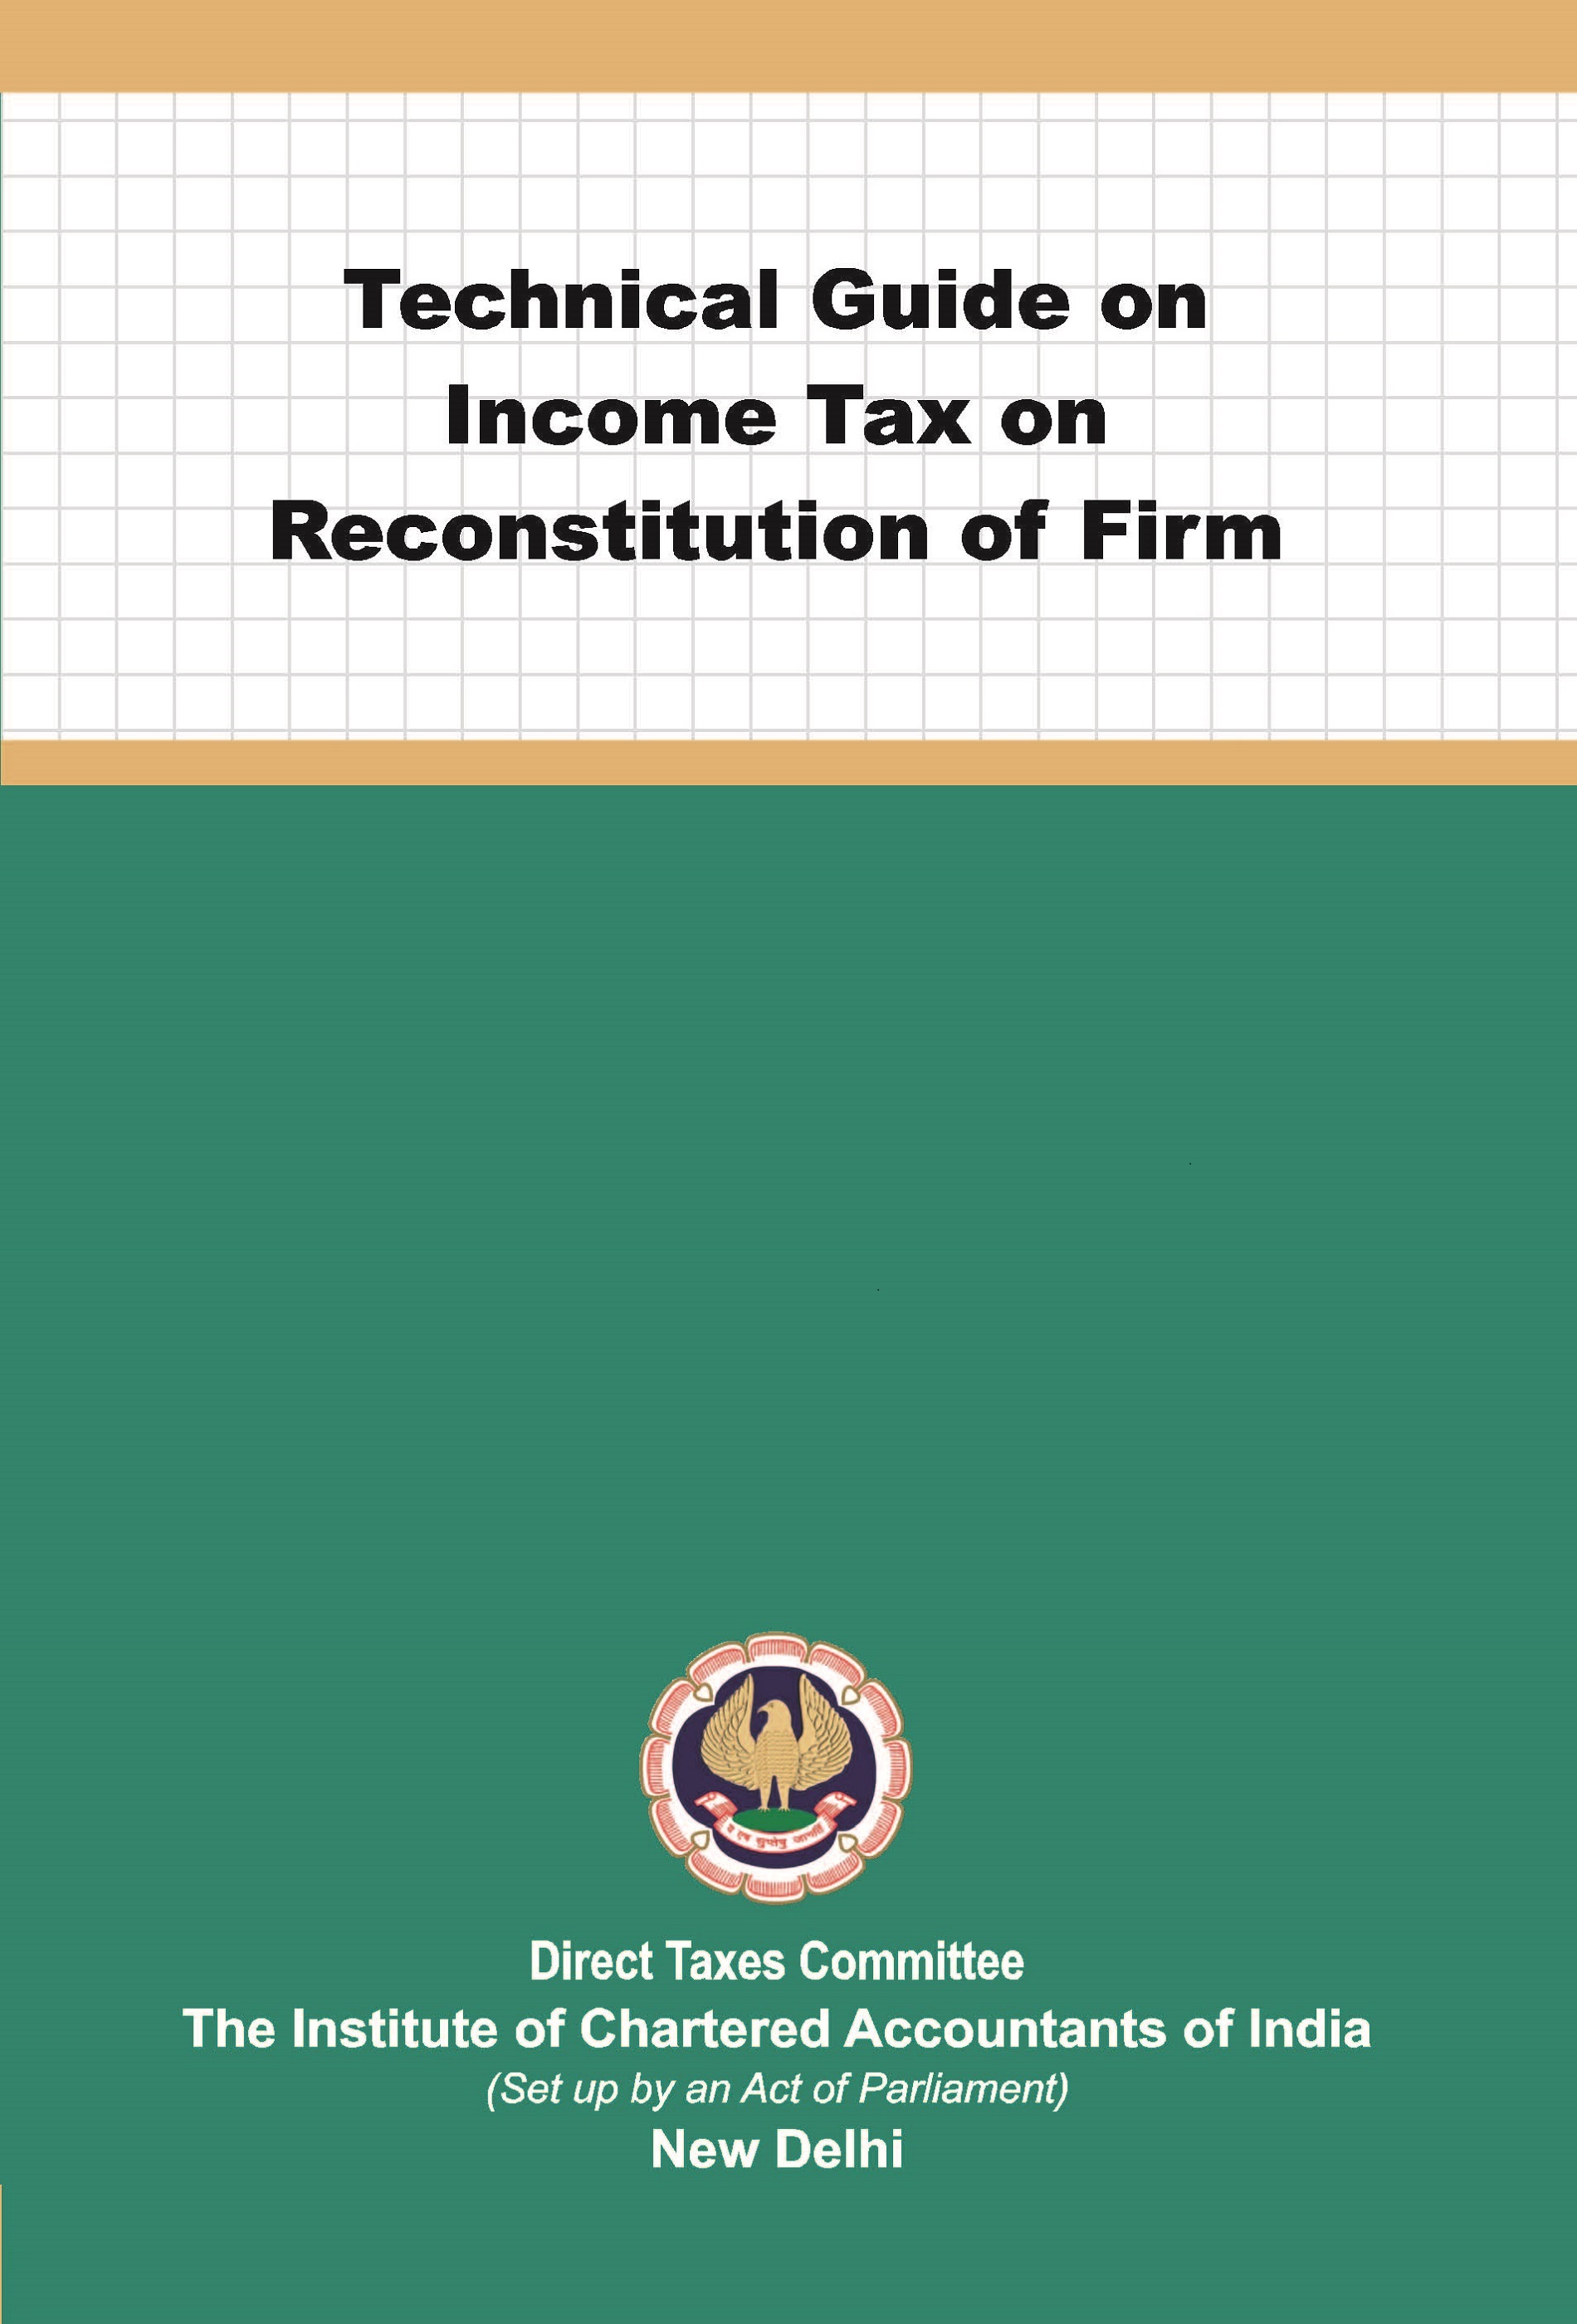 Technical Guide on Income Tax on Reconstitution of Firm (August, 2021)